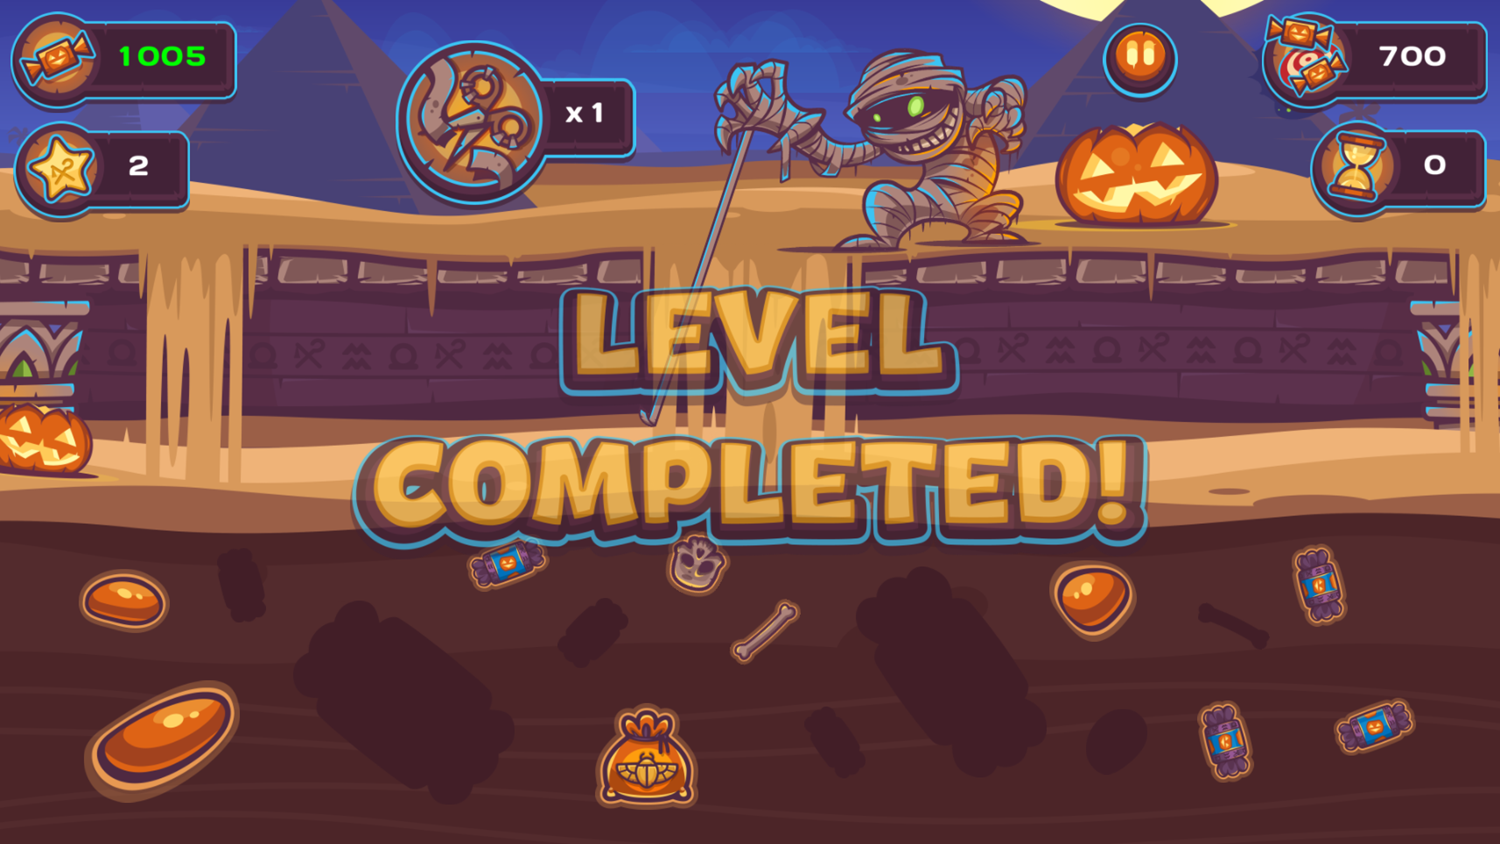 Mummy Candies Game Level Completed Screenshot.